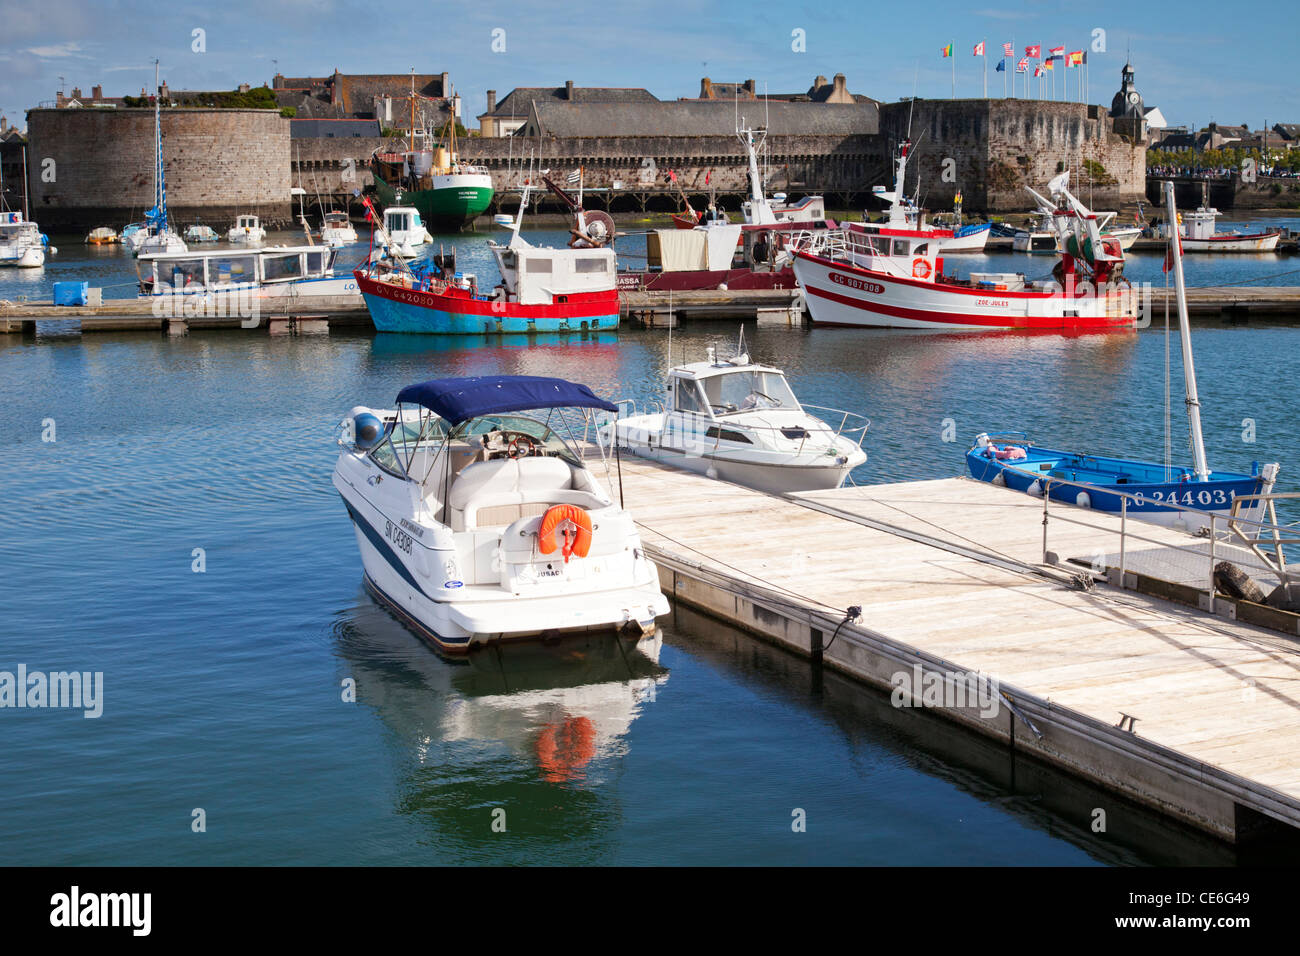 Fish boats and pleasure craft in the harbour at Concarneau, Brittany France. Concarneau is a major French fishing port. Stock Photo